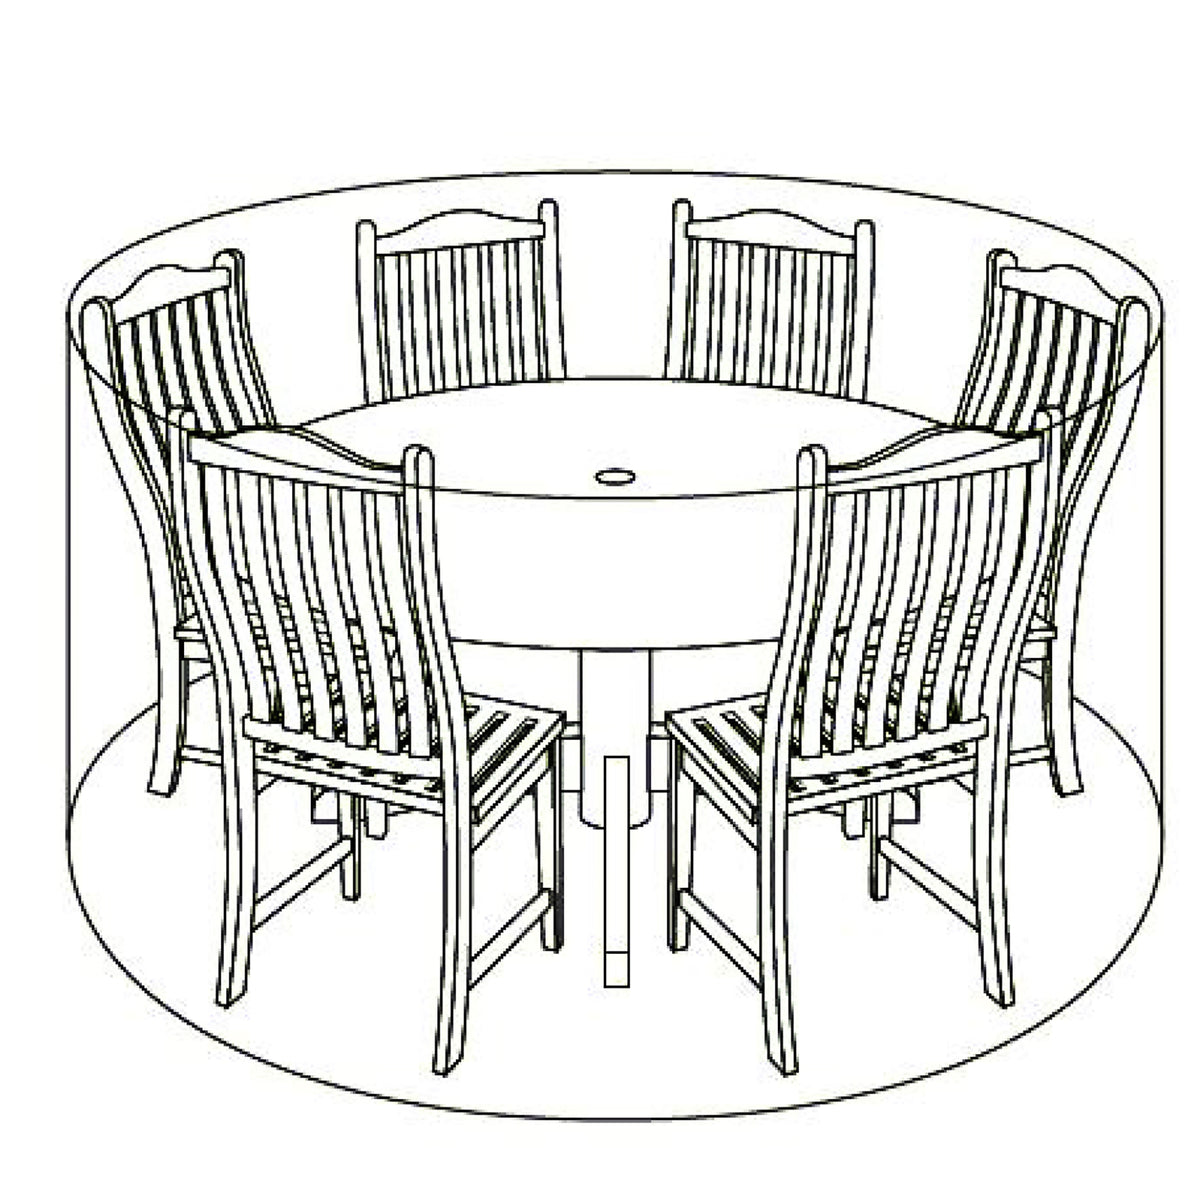 LG Outdoor 6 Seat Round Garden Furniture Set Deluxe Cover